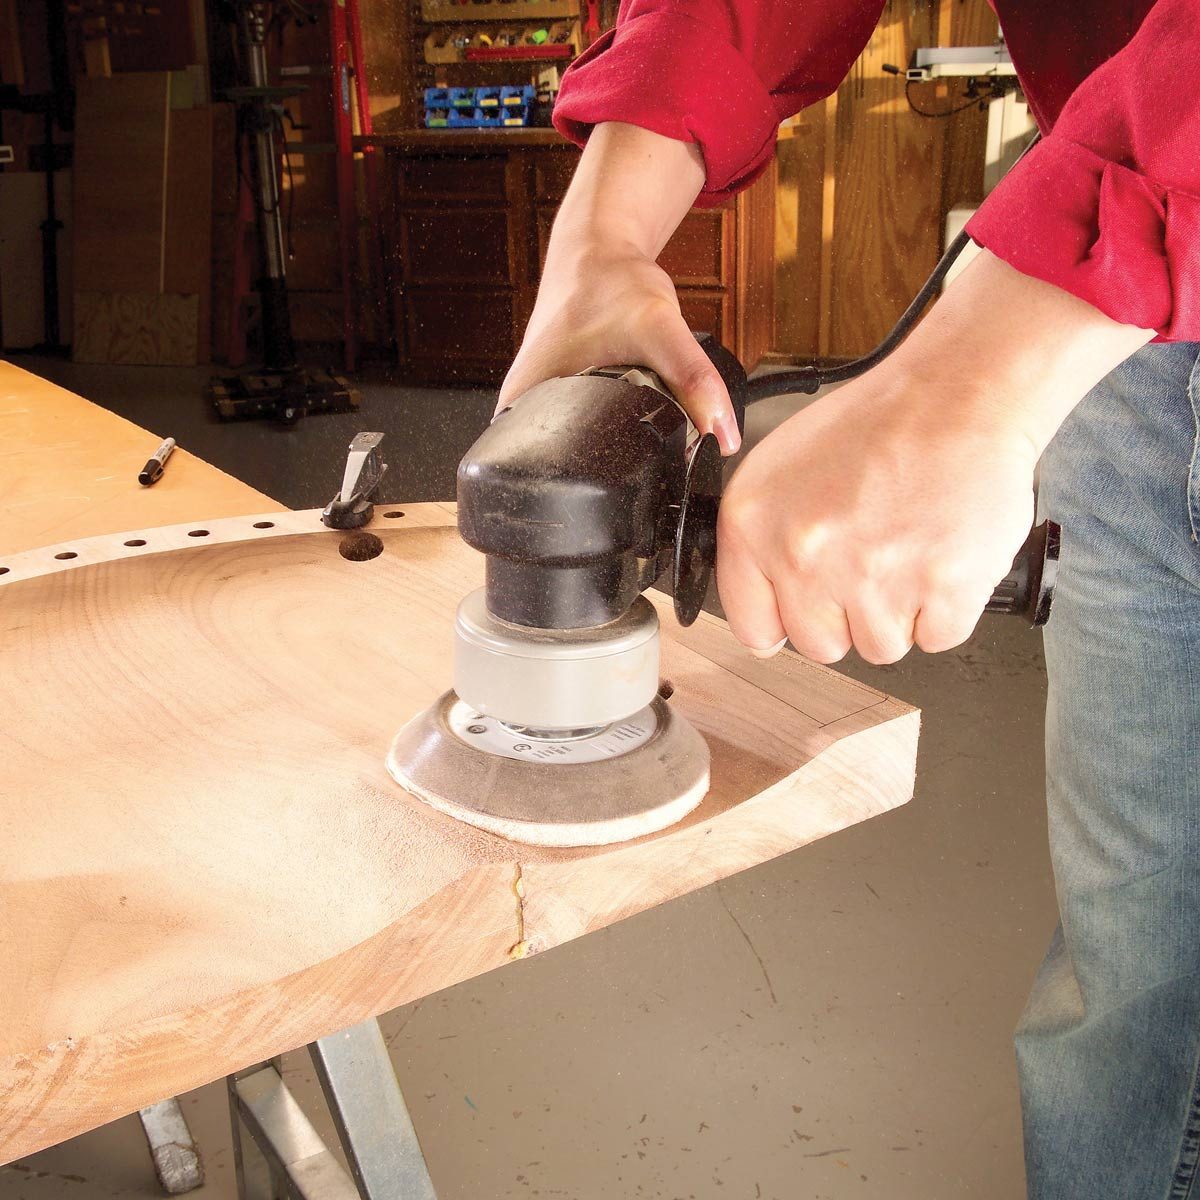 Carving Minicell foam seat with a grinder and sander